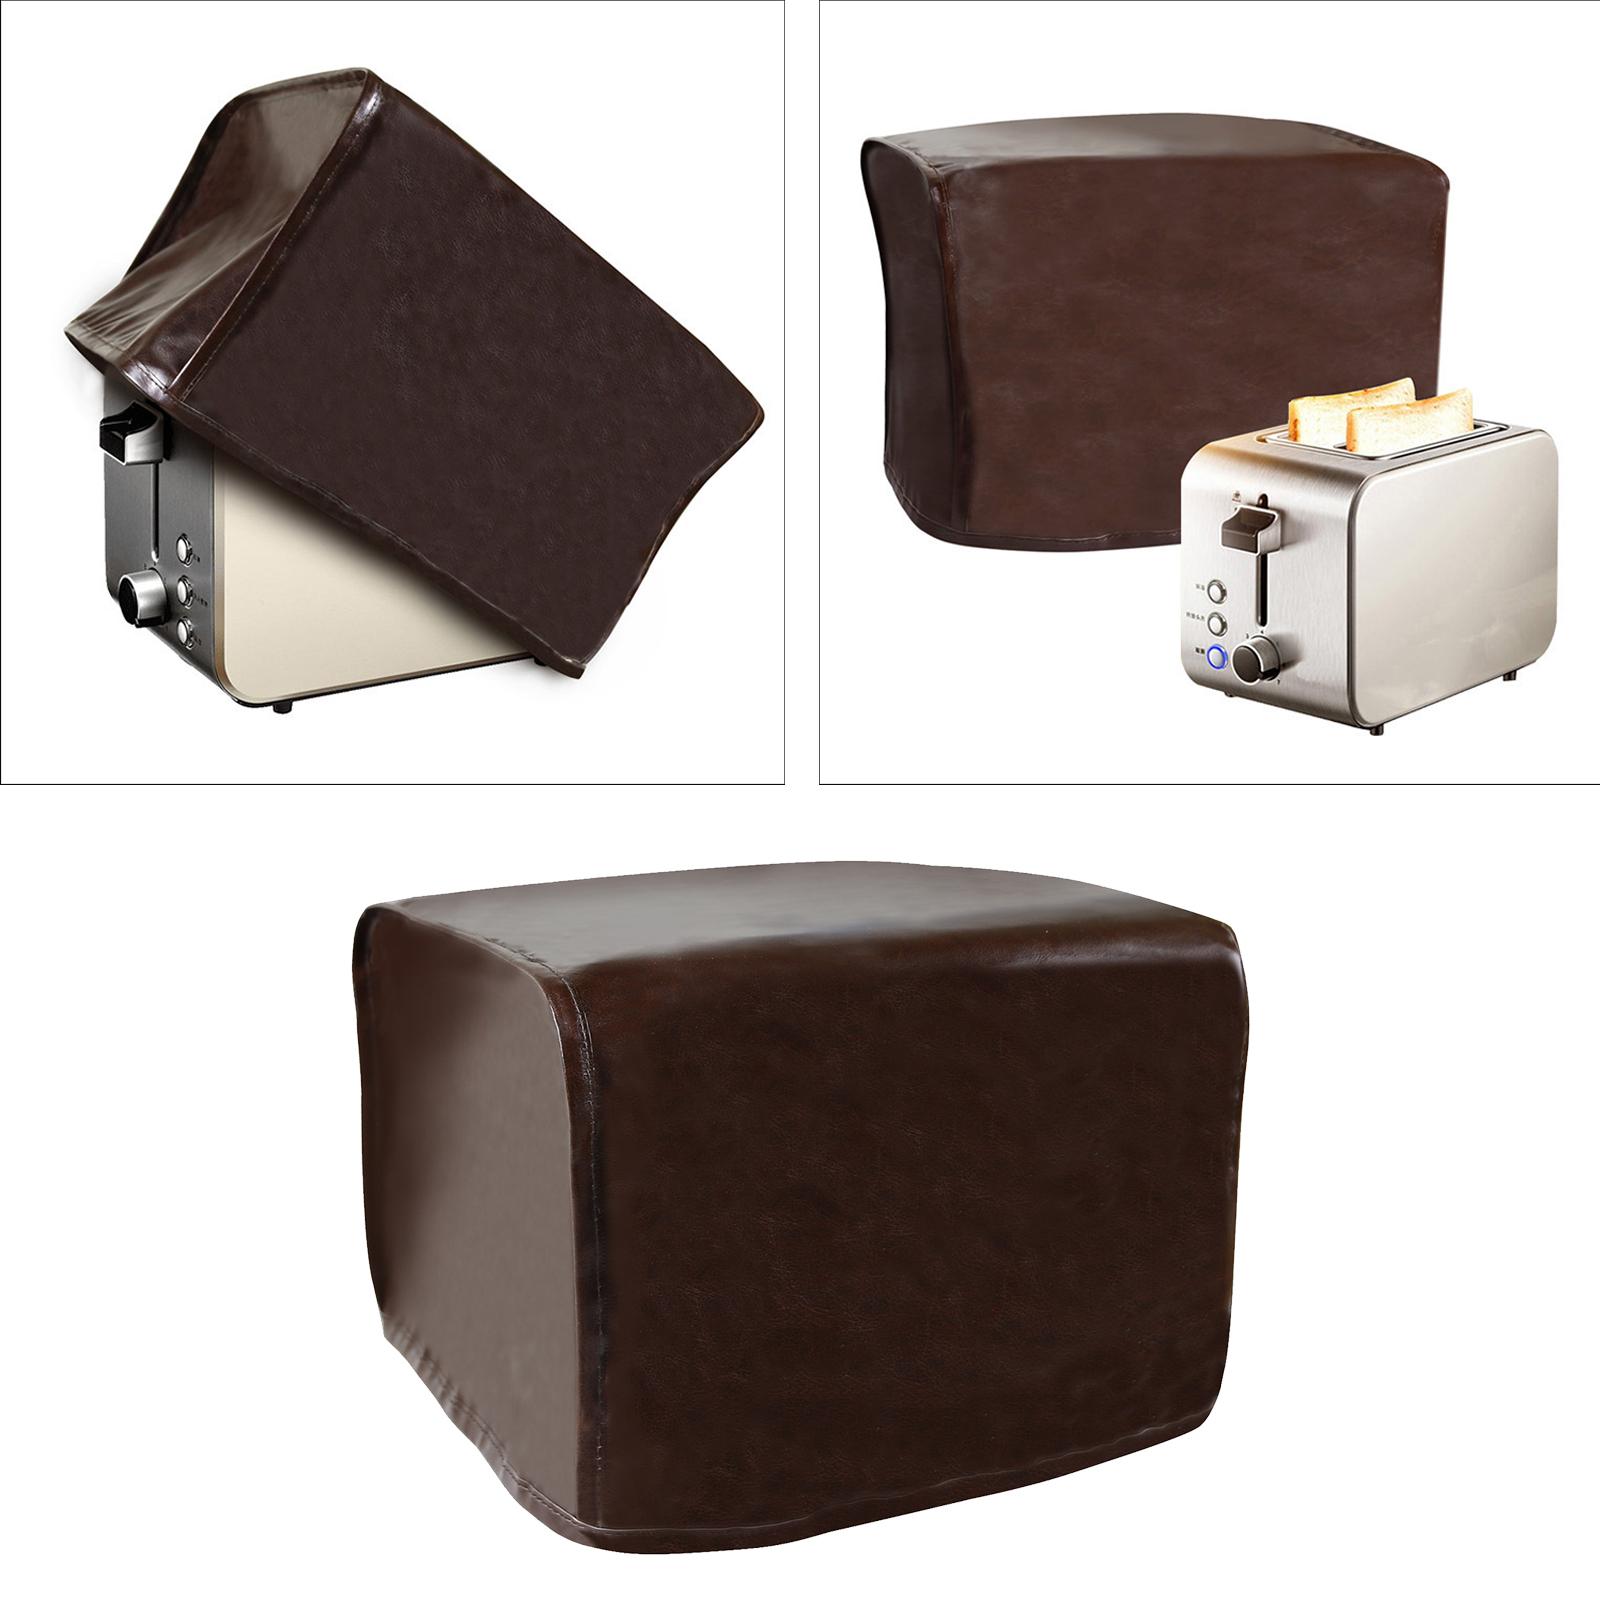 Toaster Cover Durable Attachments Washable Faux Leather Ornament Bread Machine Cover for Small Appliance Office Home Kitchen